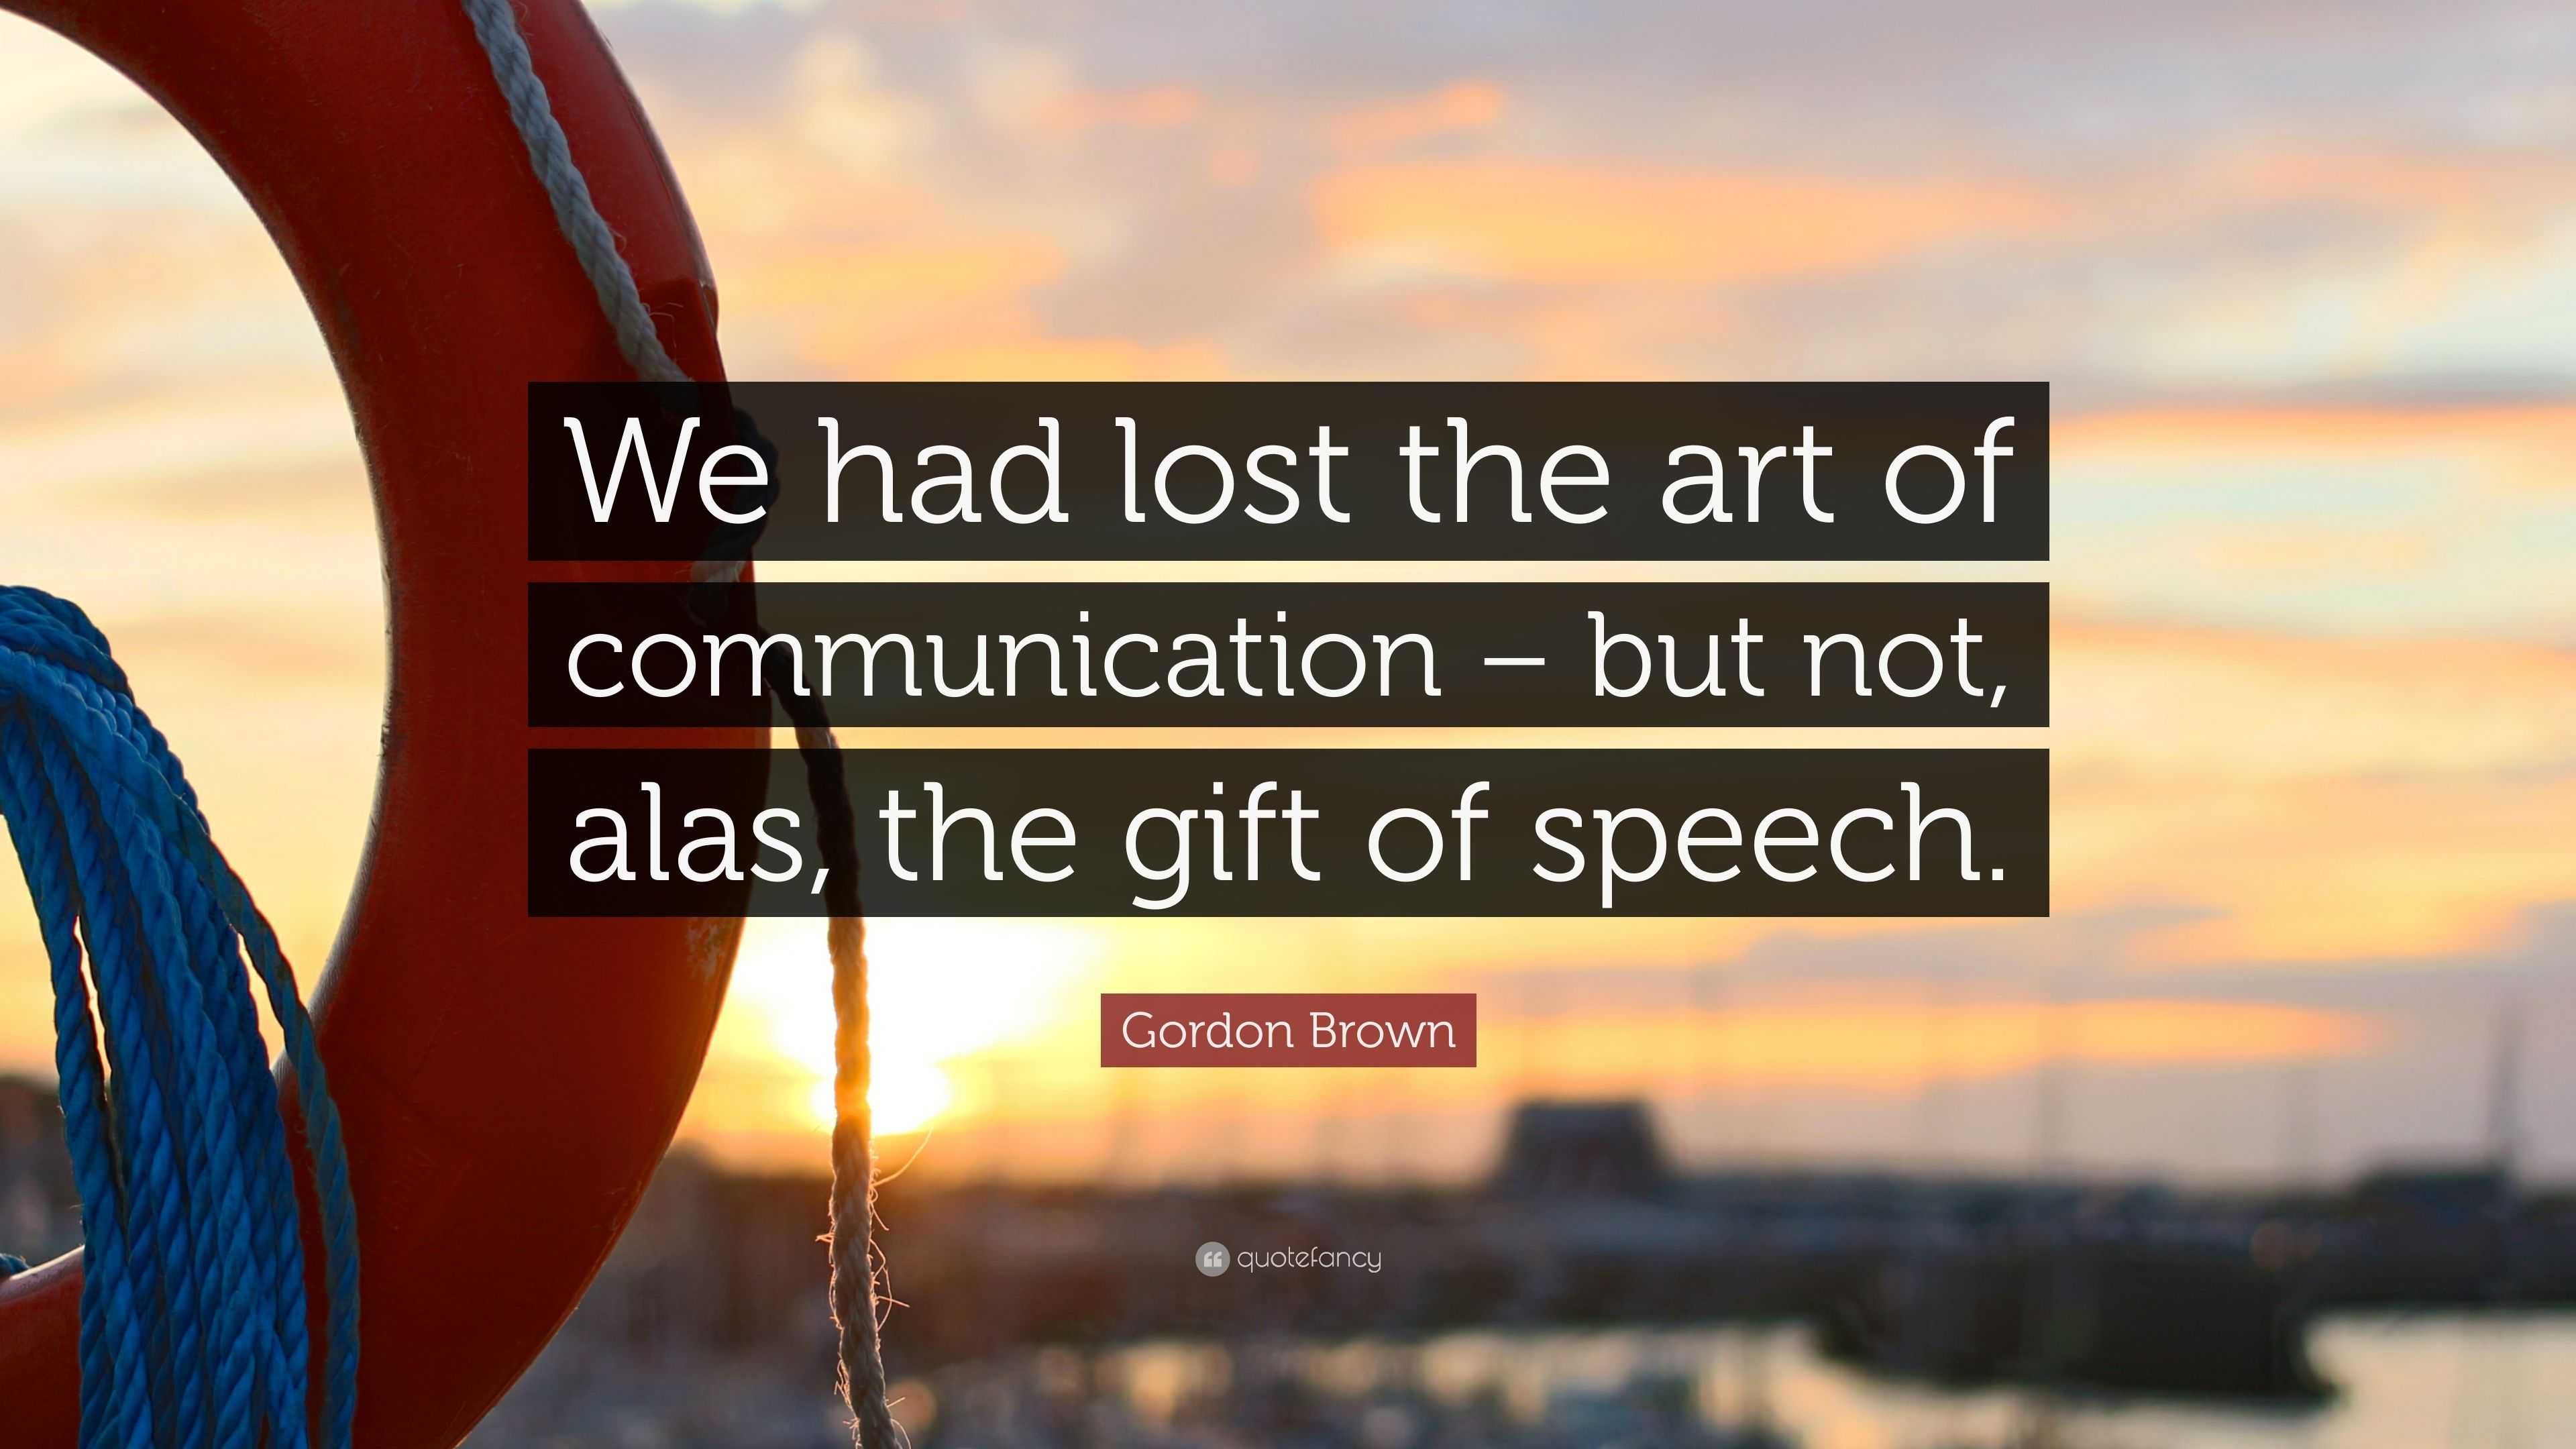 the gift of speech allows man to